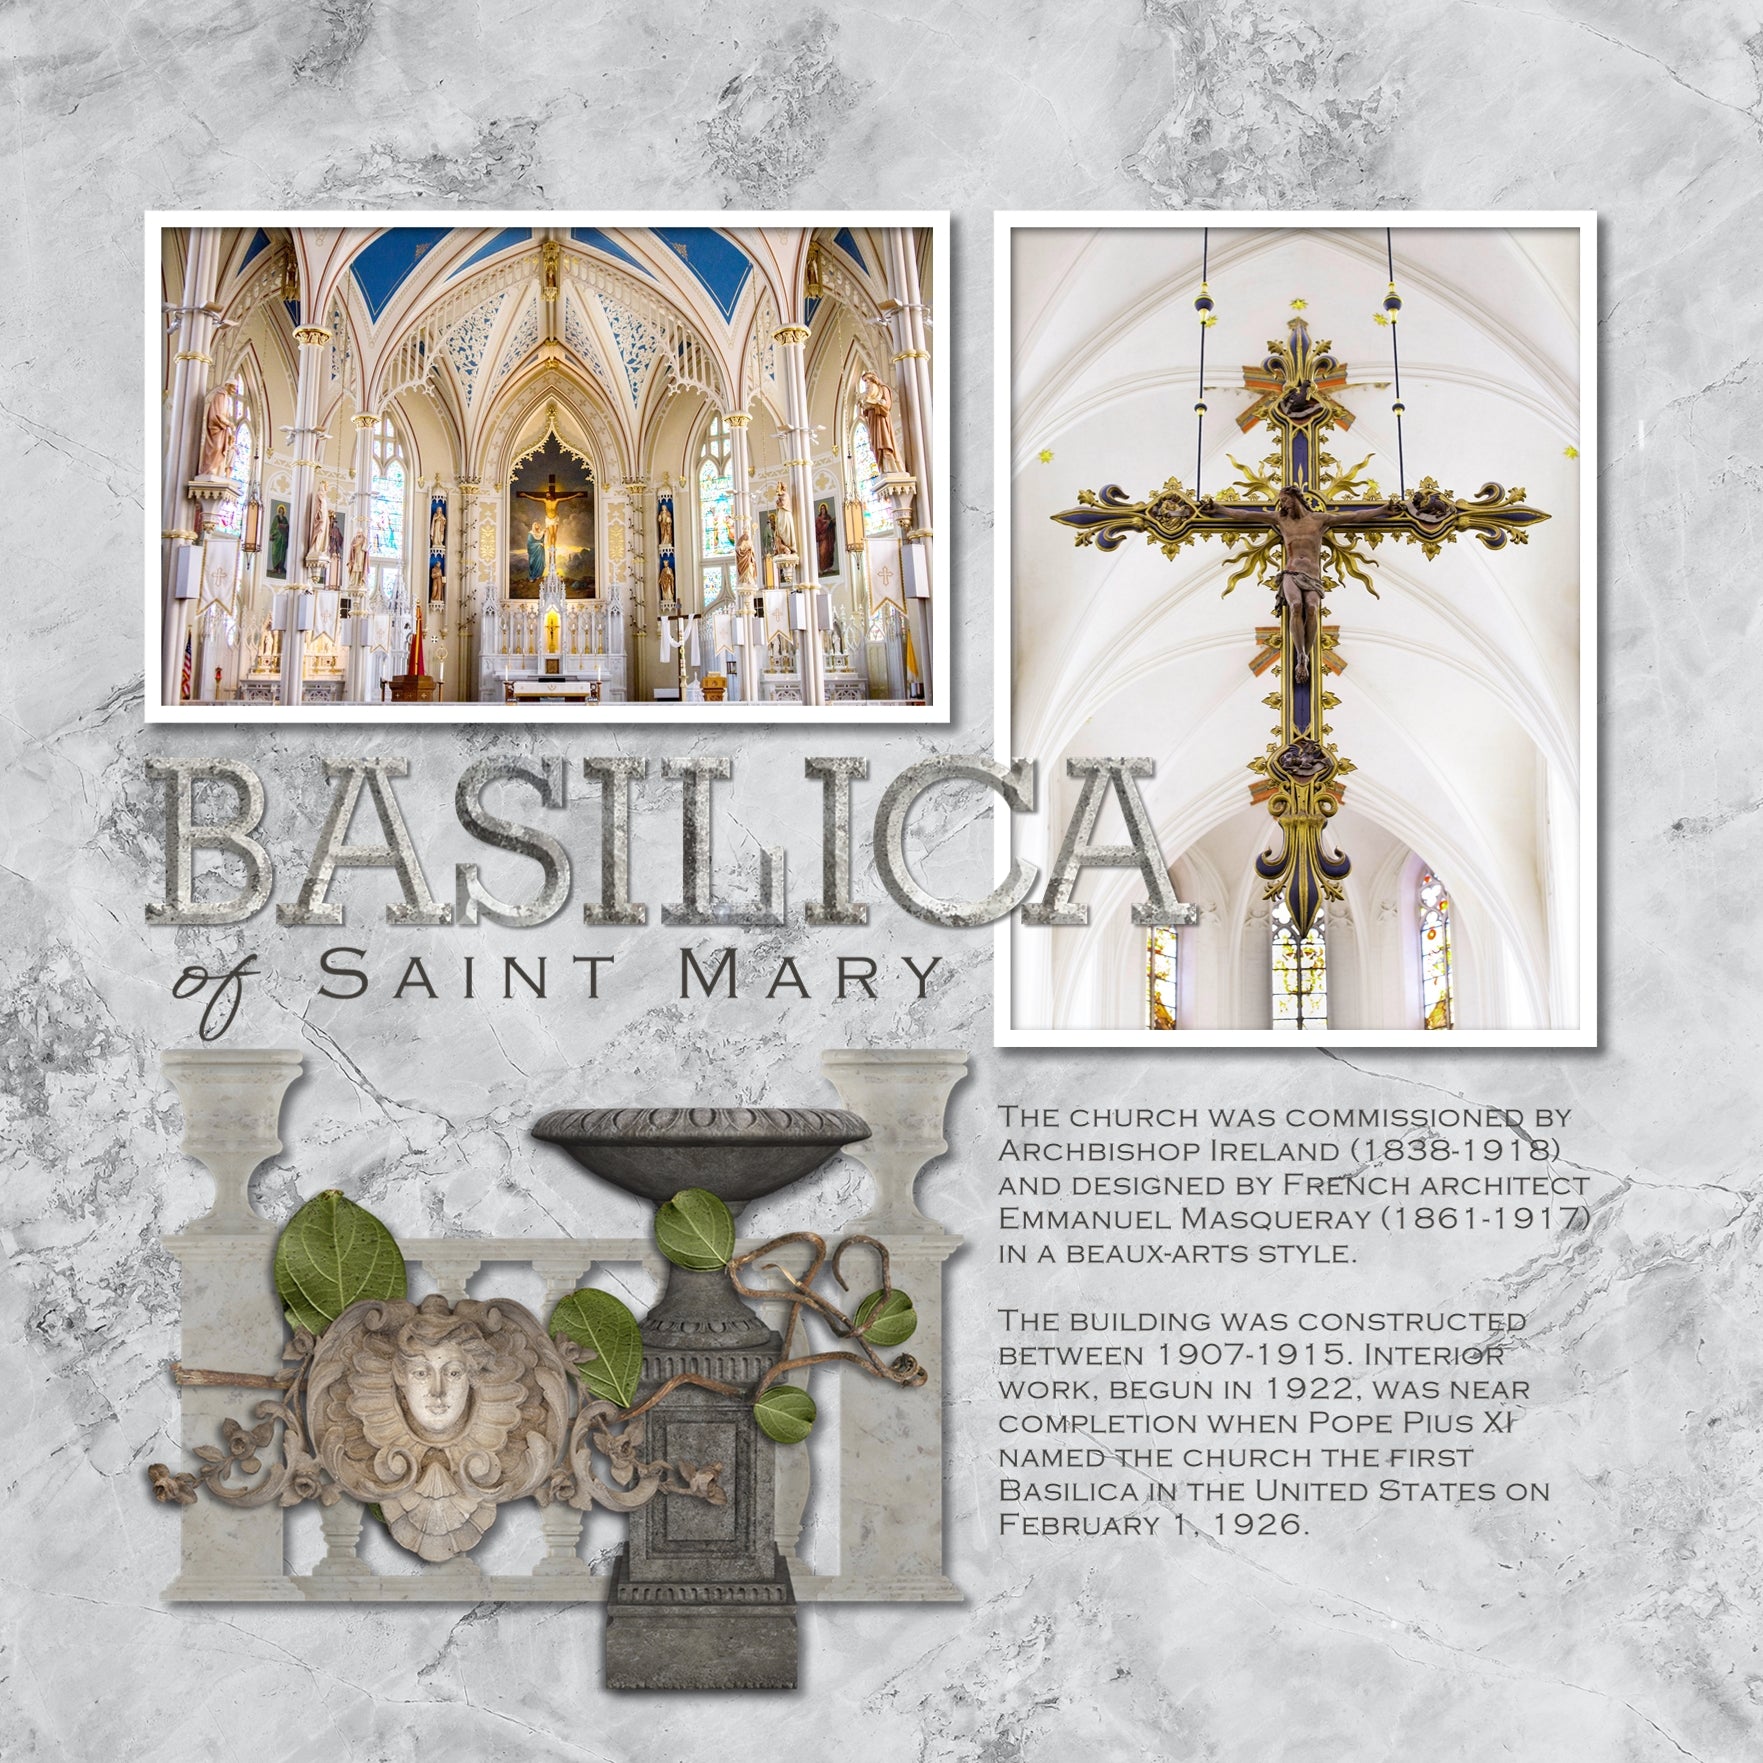 The Ornate Architecture Digital Scrapbook Bundle features authentic digital art antique architectural stone artifacts, metal pieces, plus versatile granite and marble papers, clusters, frames, and an embellishment alpha set. Great for layering pieces on visits to the museum or vacations to historic sites. 